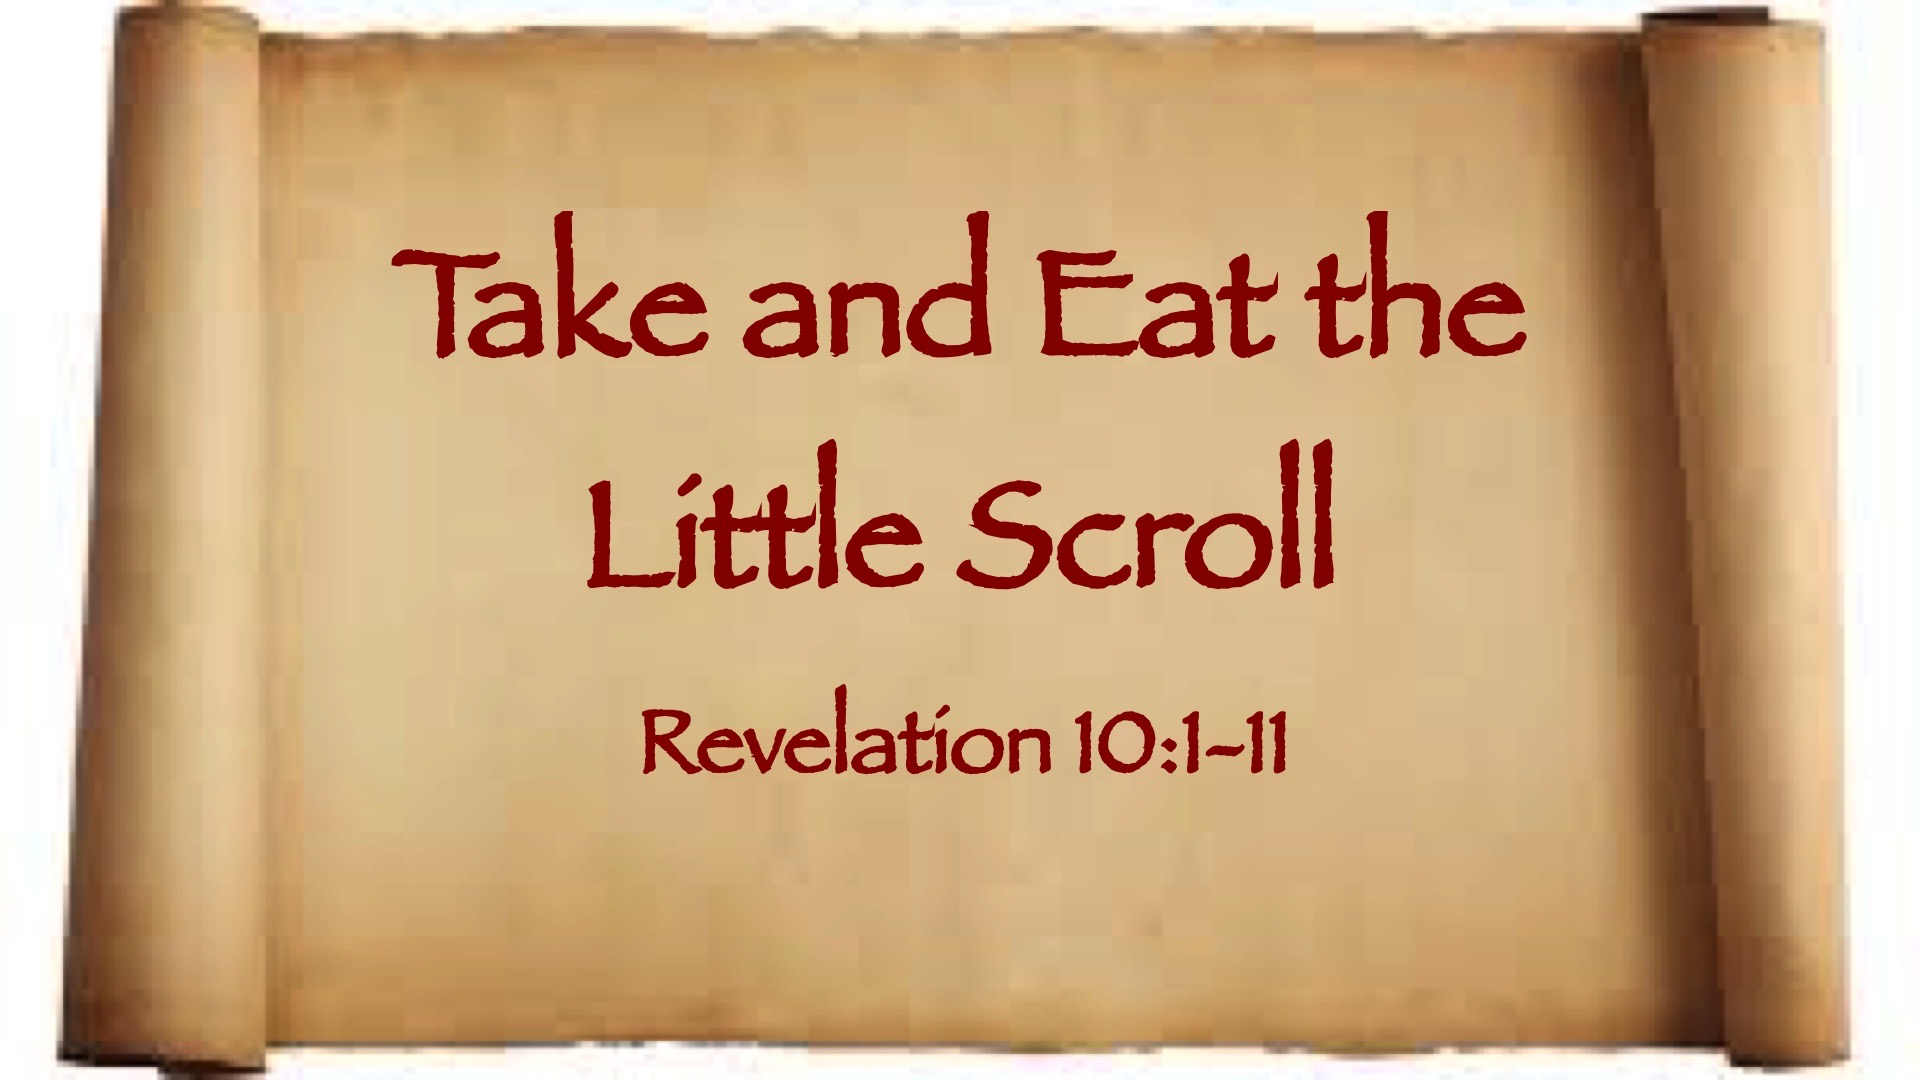 “The Book of Revelation: Take and Eat the Little Scroll”